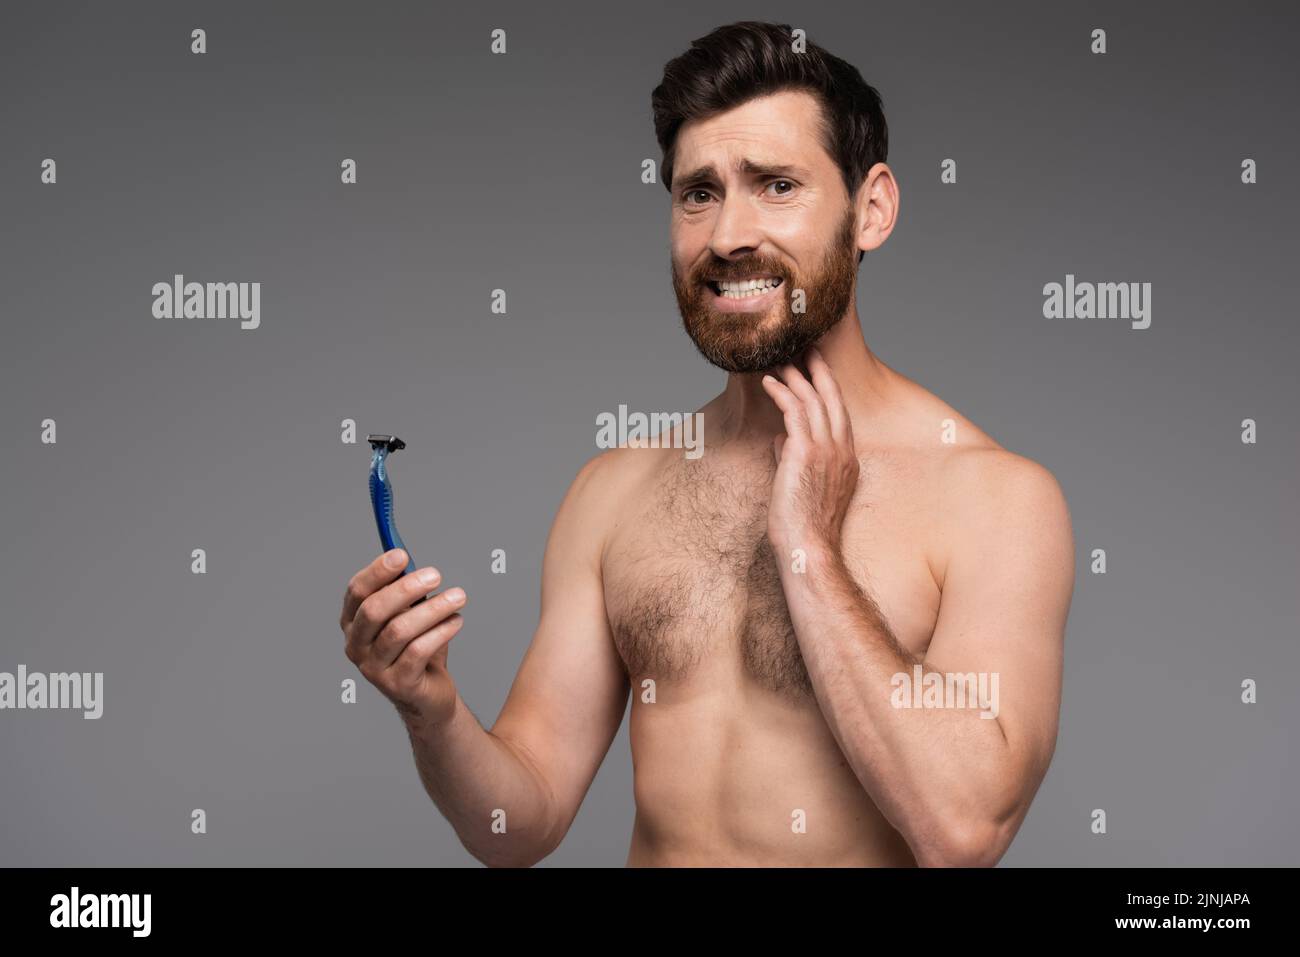 displeased and shirtless man with beard holding safety razor isolated on grey,stock image Stock Photo